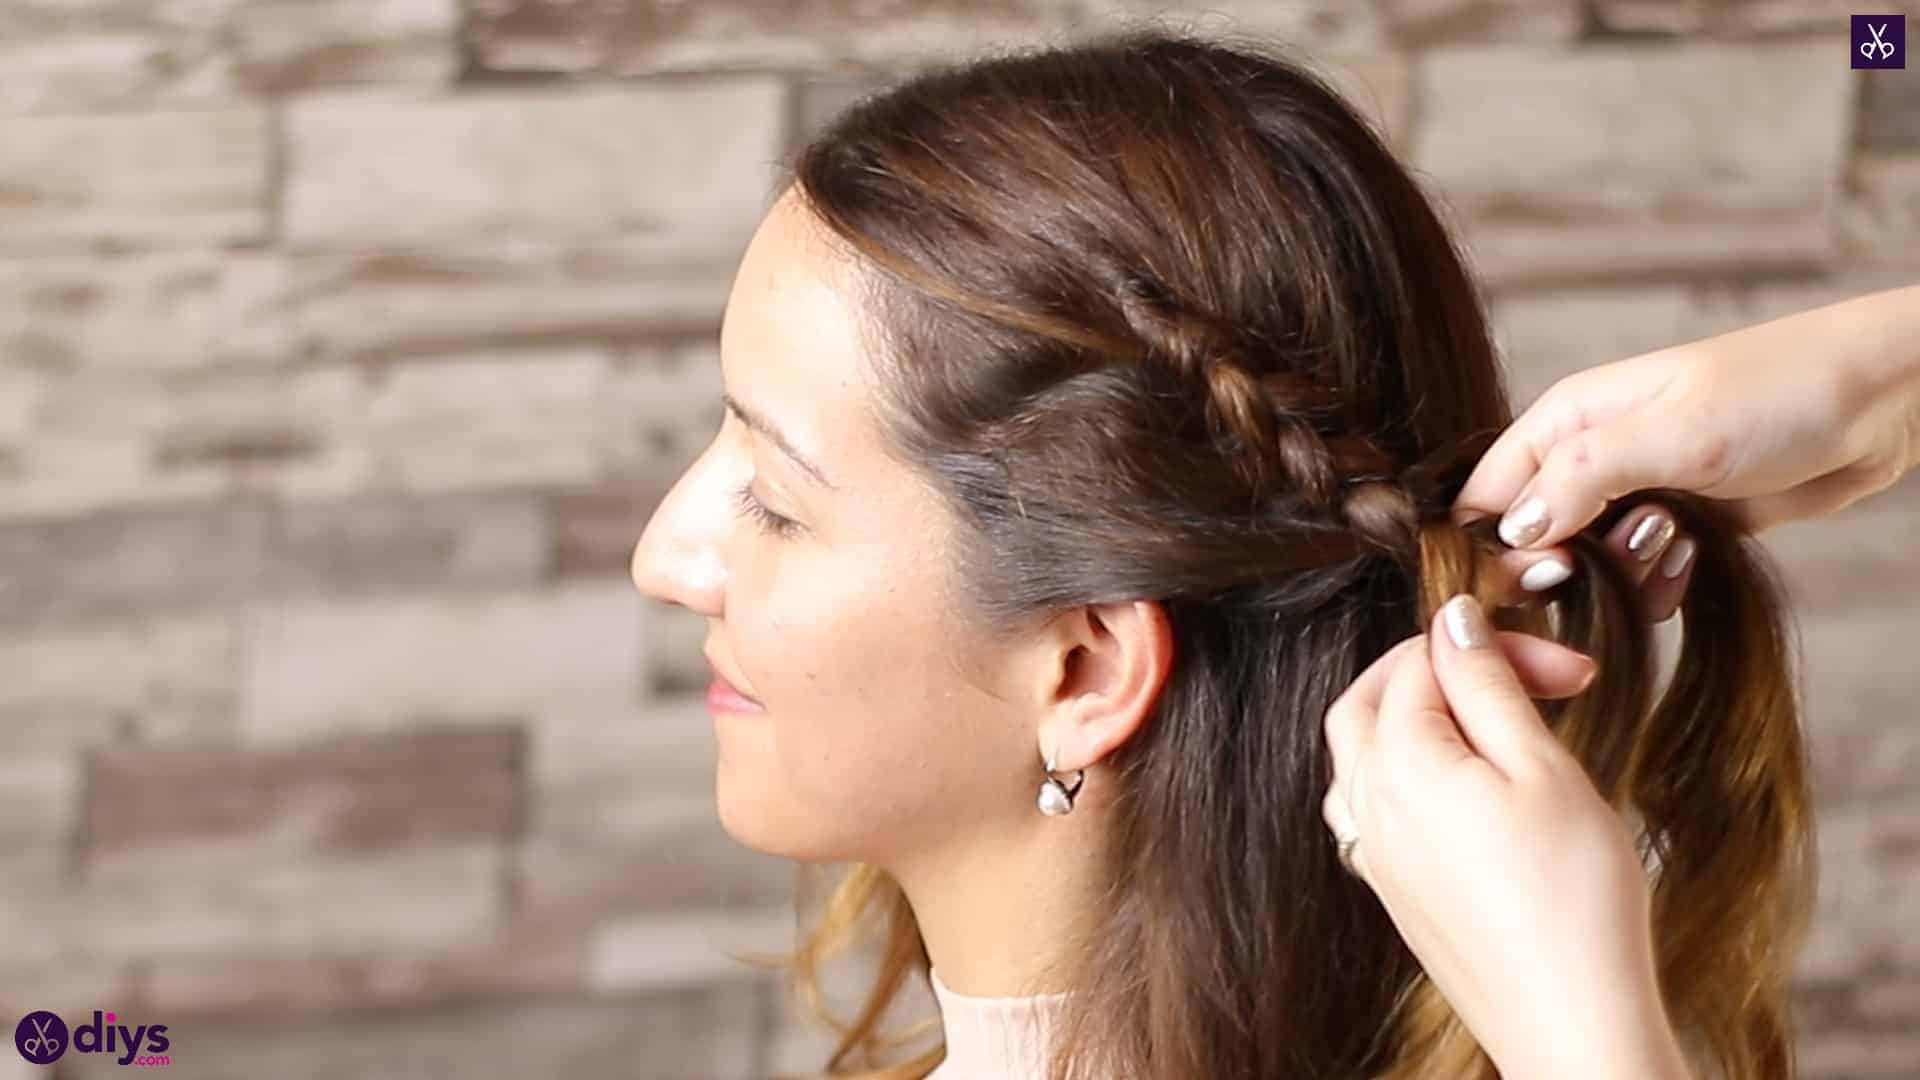 How To Side Braid Your Own Hair For Beginners - Video Tutorial